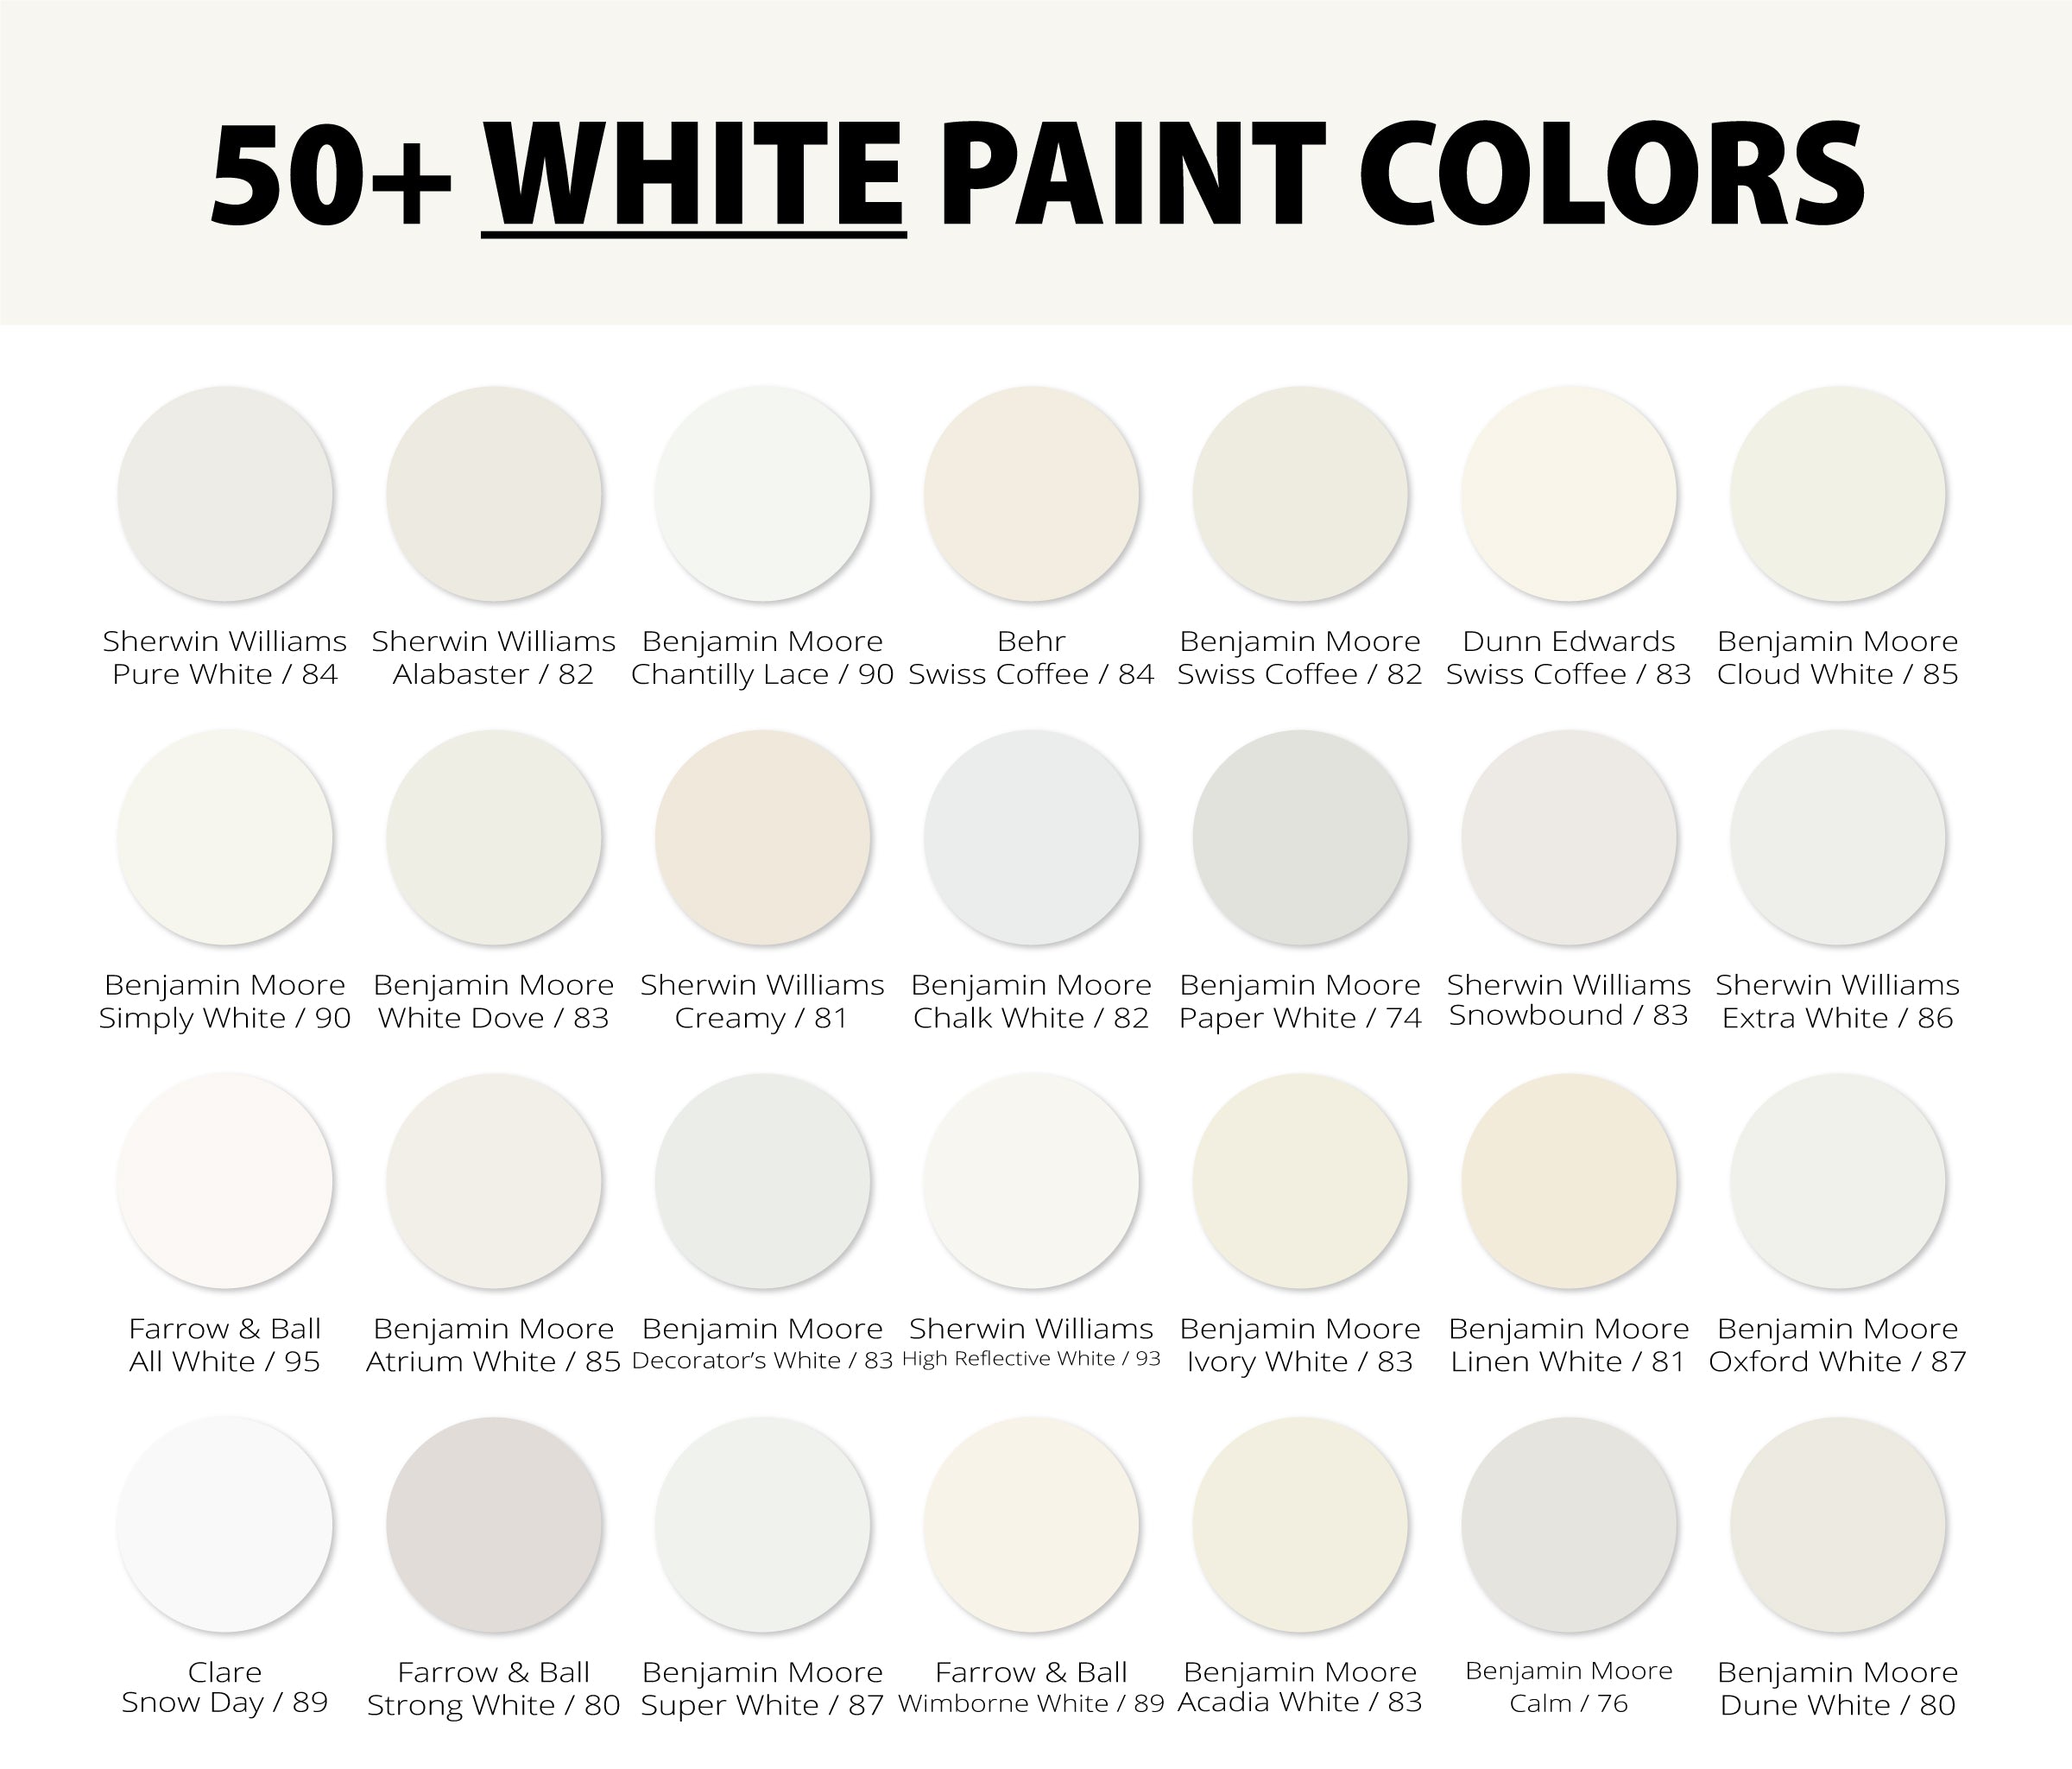 The Best White Paint Colors, According to Interior Designers – Clare